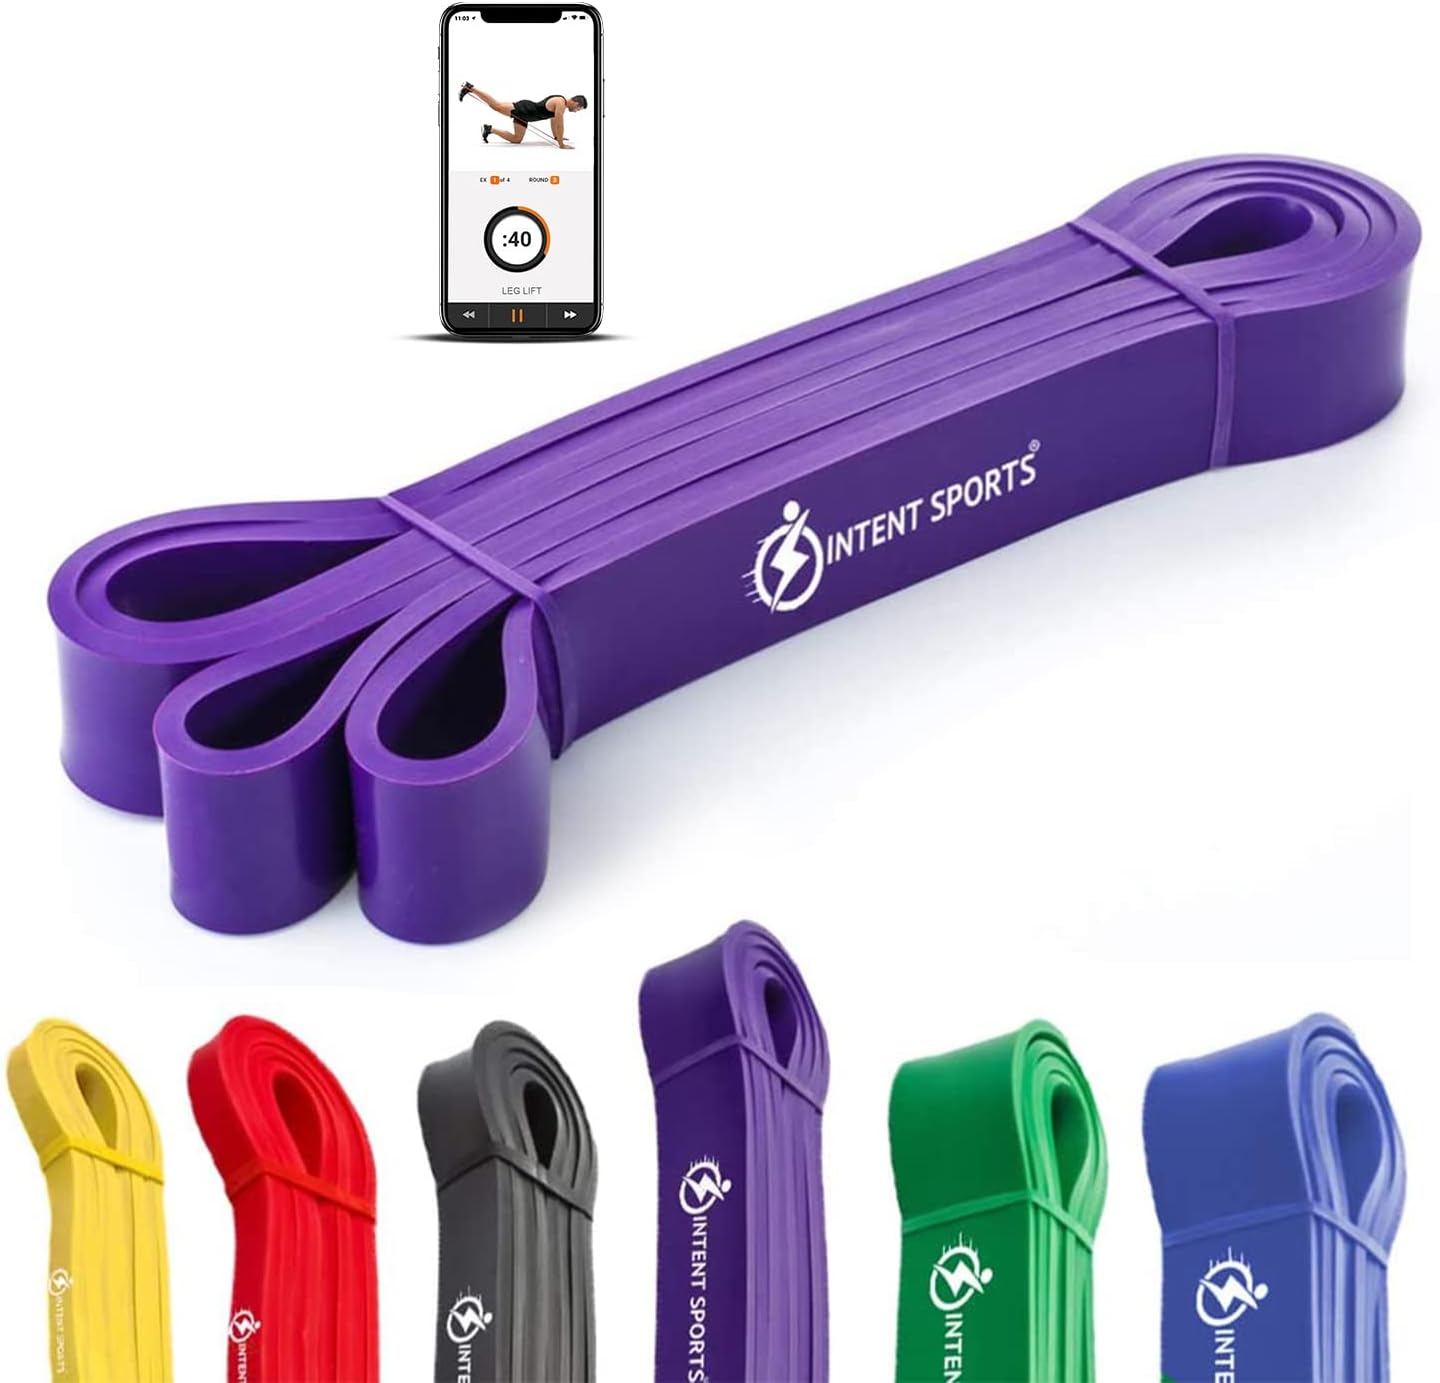 Pull Up Assist Bands - Purple- 40 to 80 Pounds (1.25" *4.5mm)